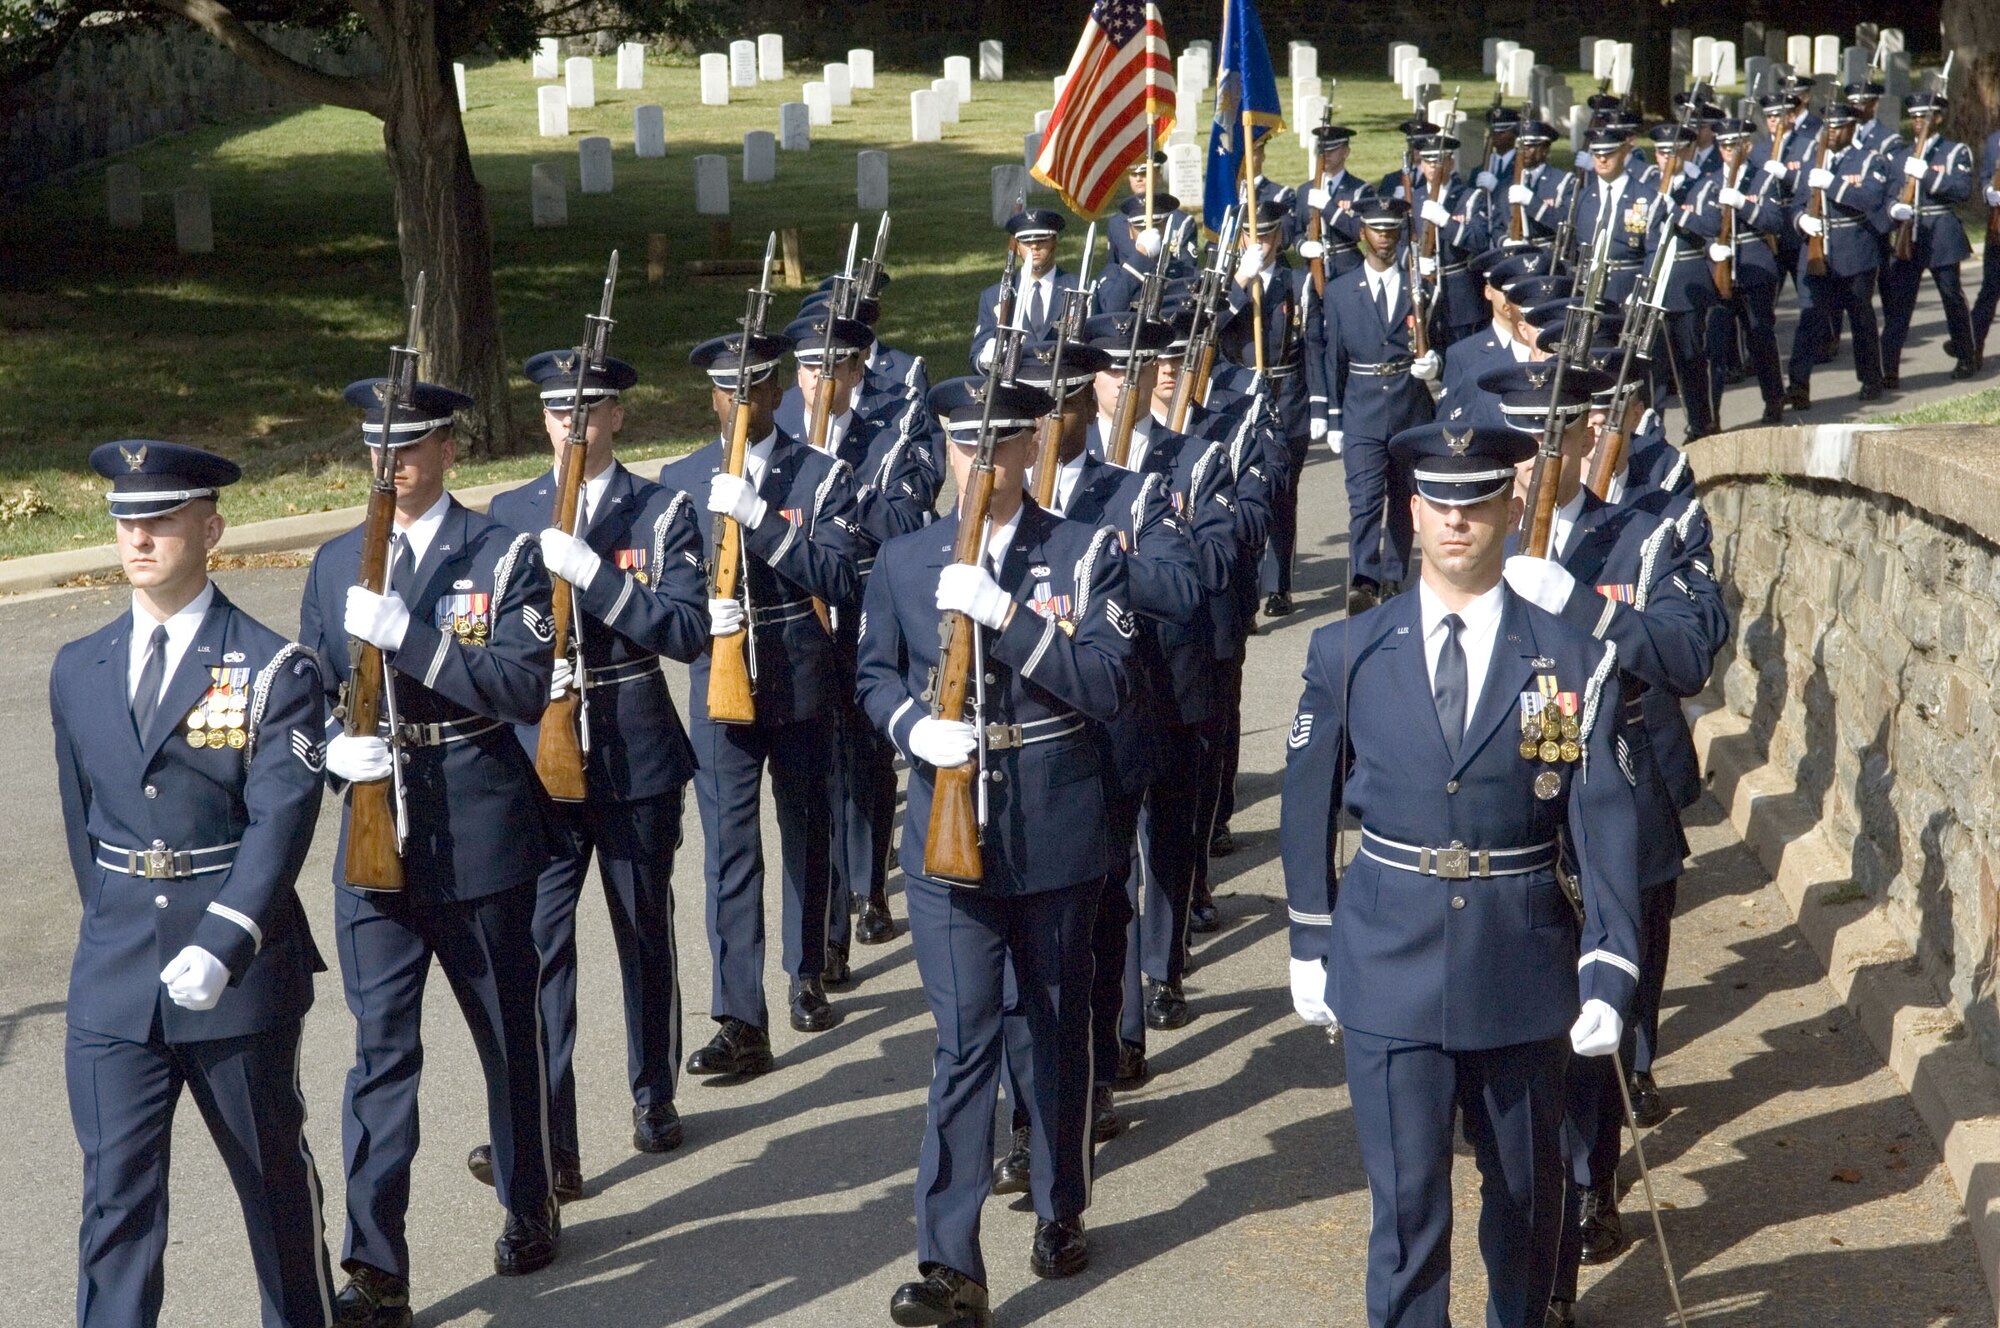 The U.S. Air Force Honor Guard marches in the funeral procession for retired Maj. Gen. Jack I. Posner at Arlington National Cemetery on Aug. 11. General Posner was among the last bomber pilots to have served in World War II. (U.S. Air Force photo/Tech. Sgt. Cohen A. Young) 

